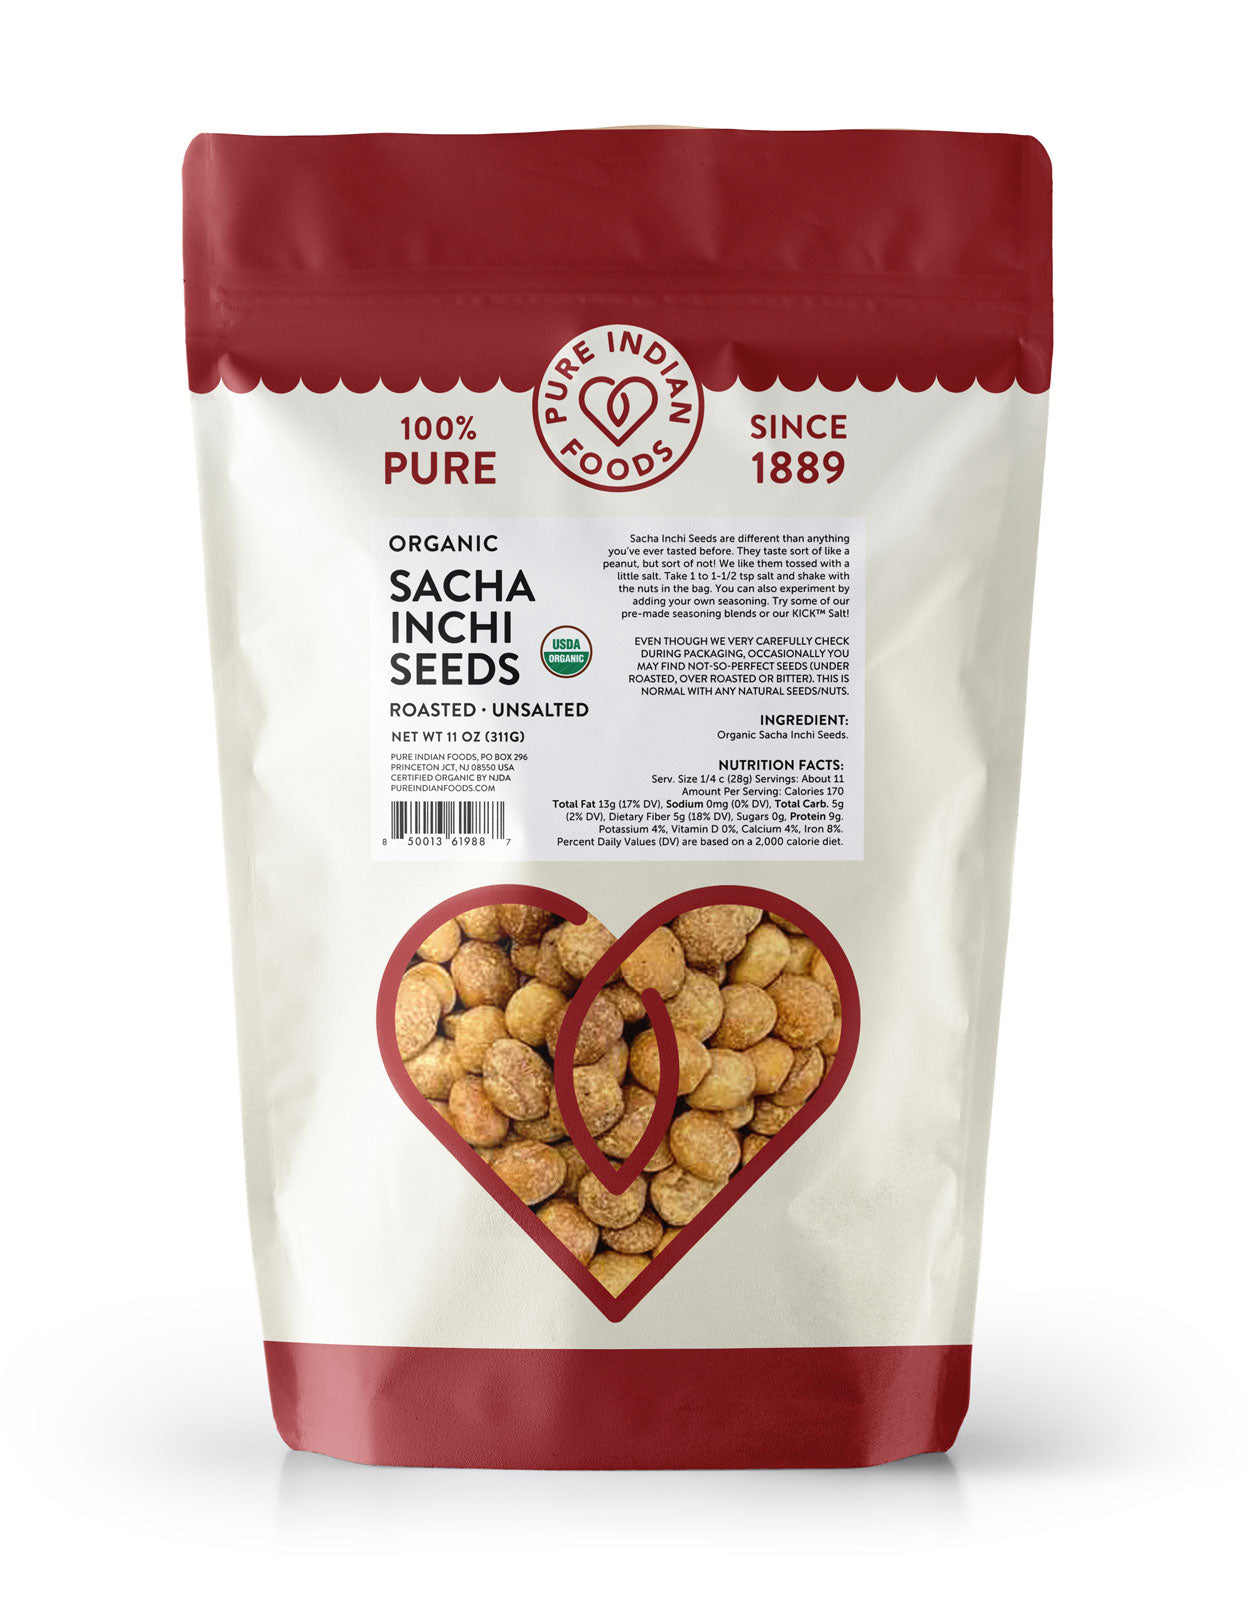 1 bag of Pure Indian Foods Organic Sacha Inchi Seeds, sometimes called Incan Seeds, roasted and unsalted.